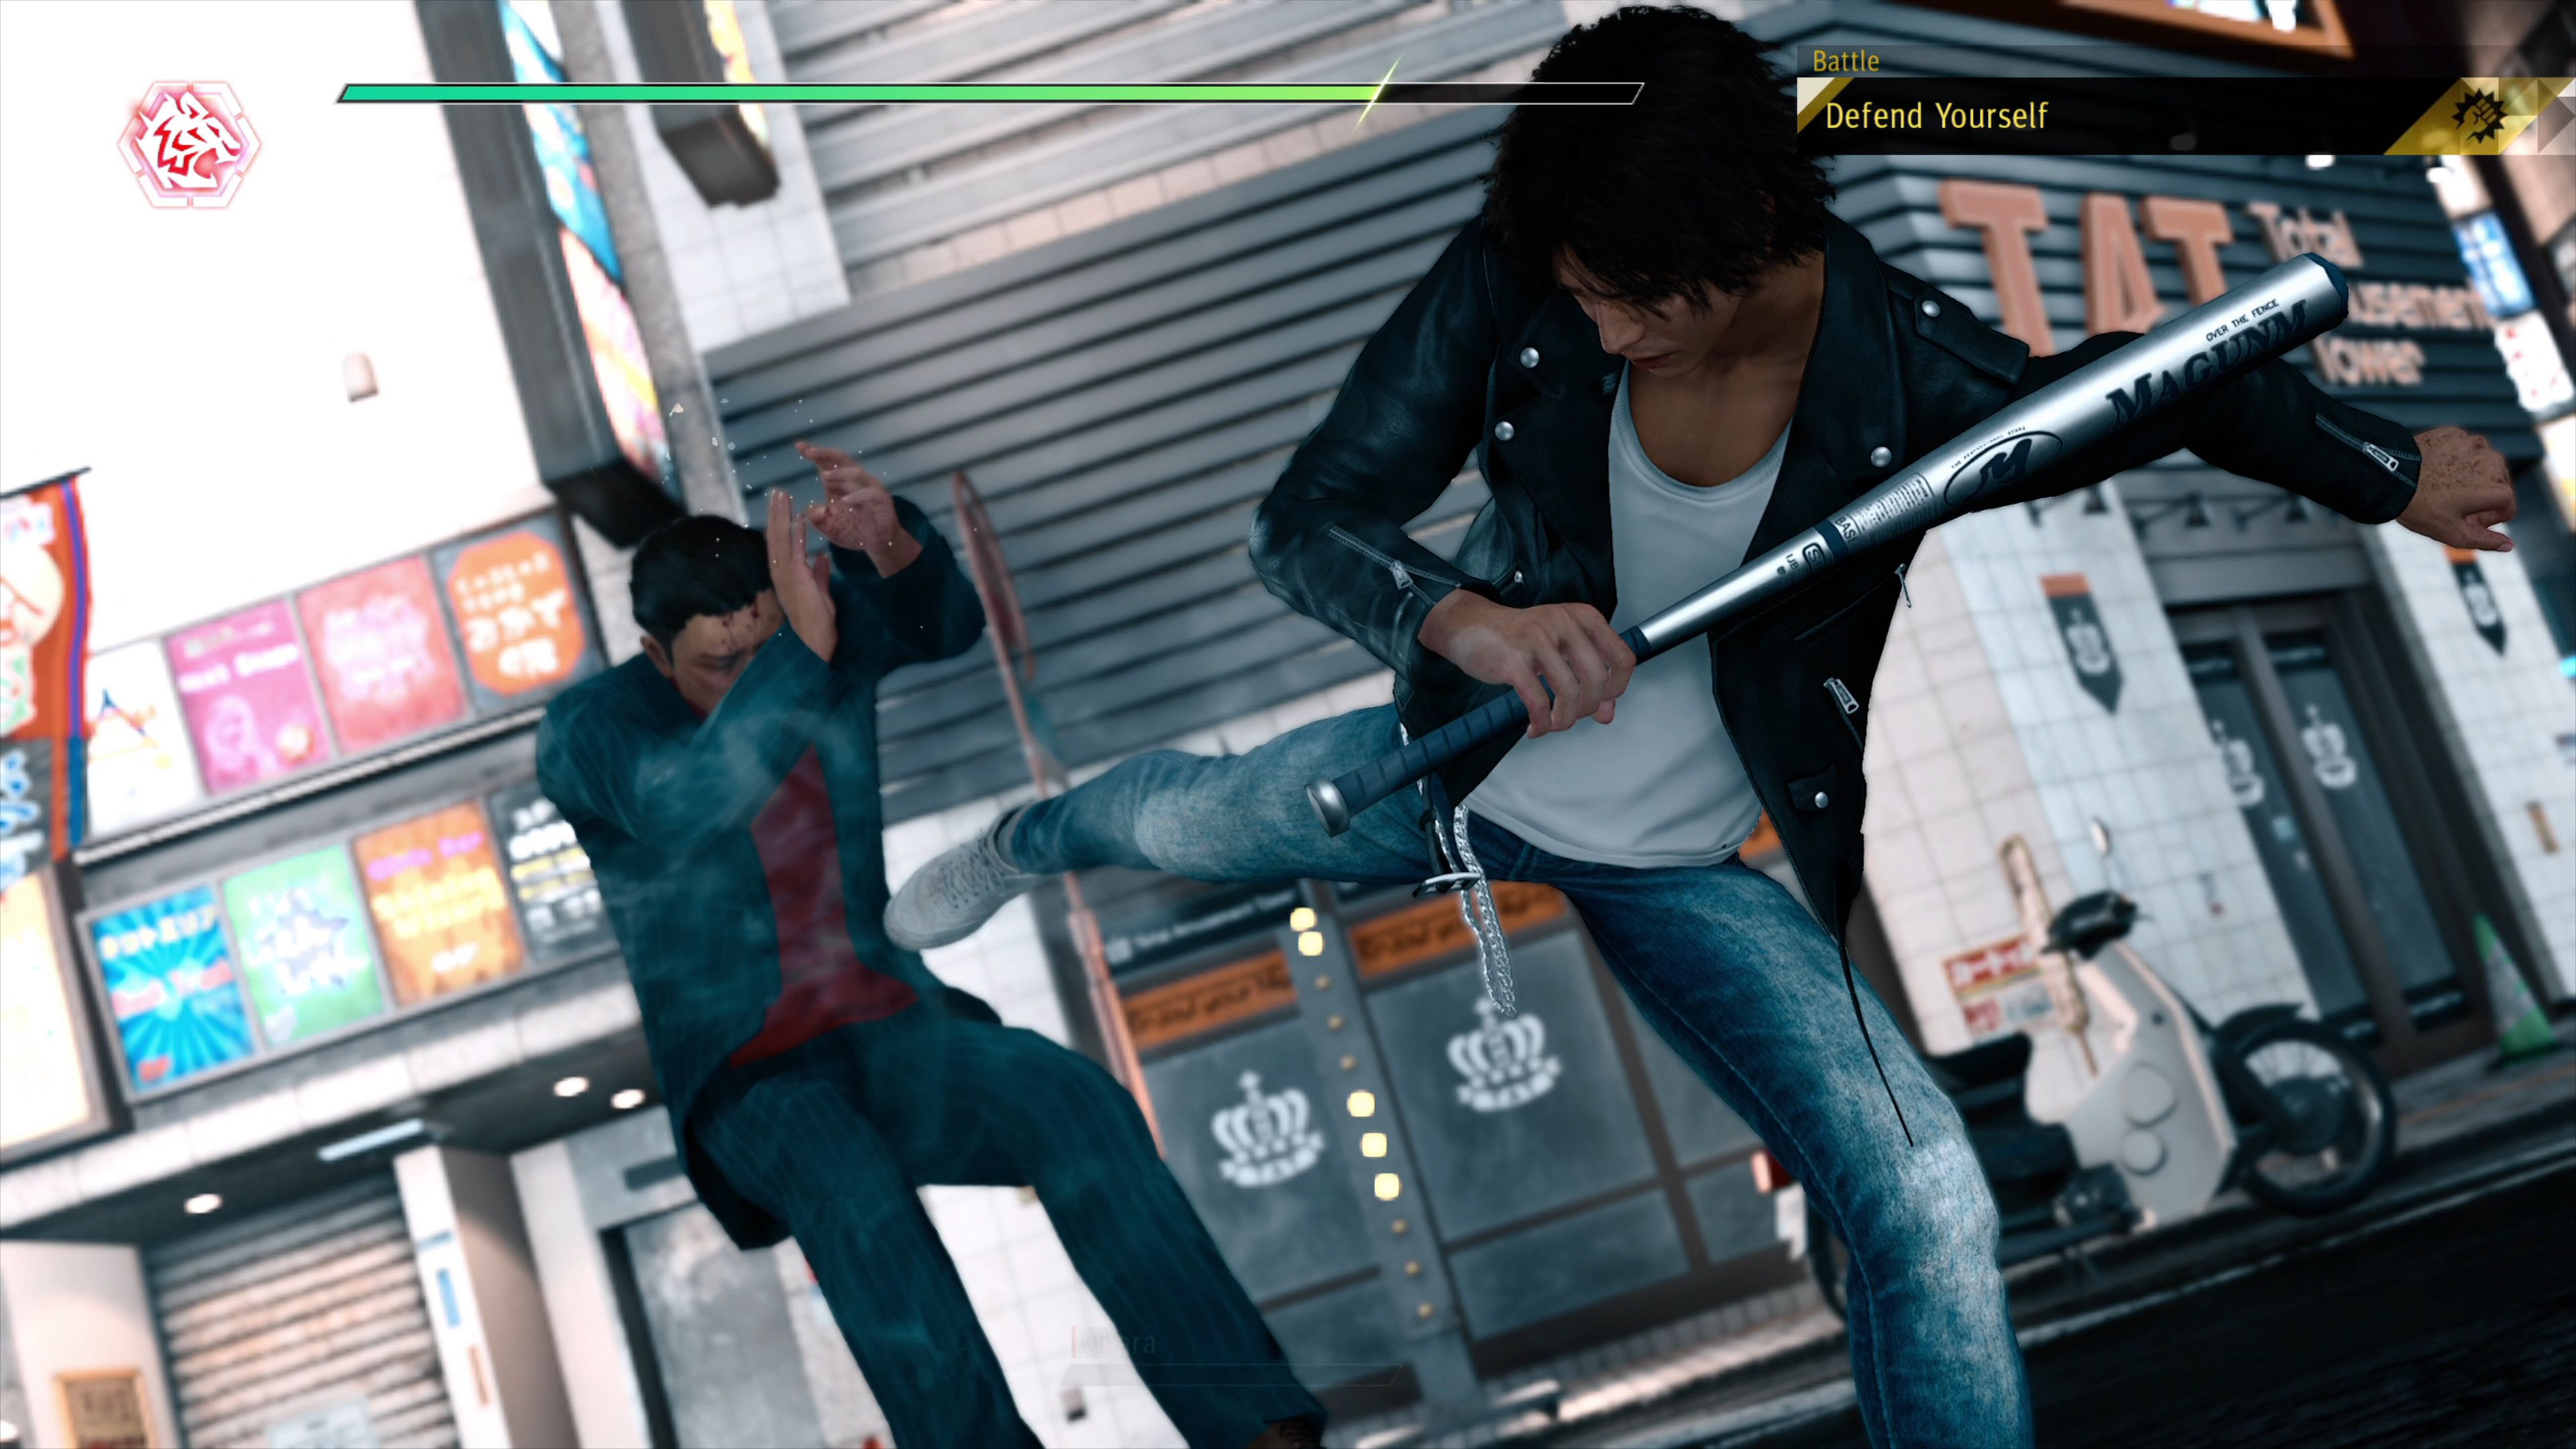 Judgment is getting remastered for PS5, launching in April